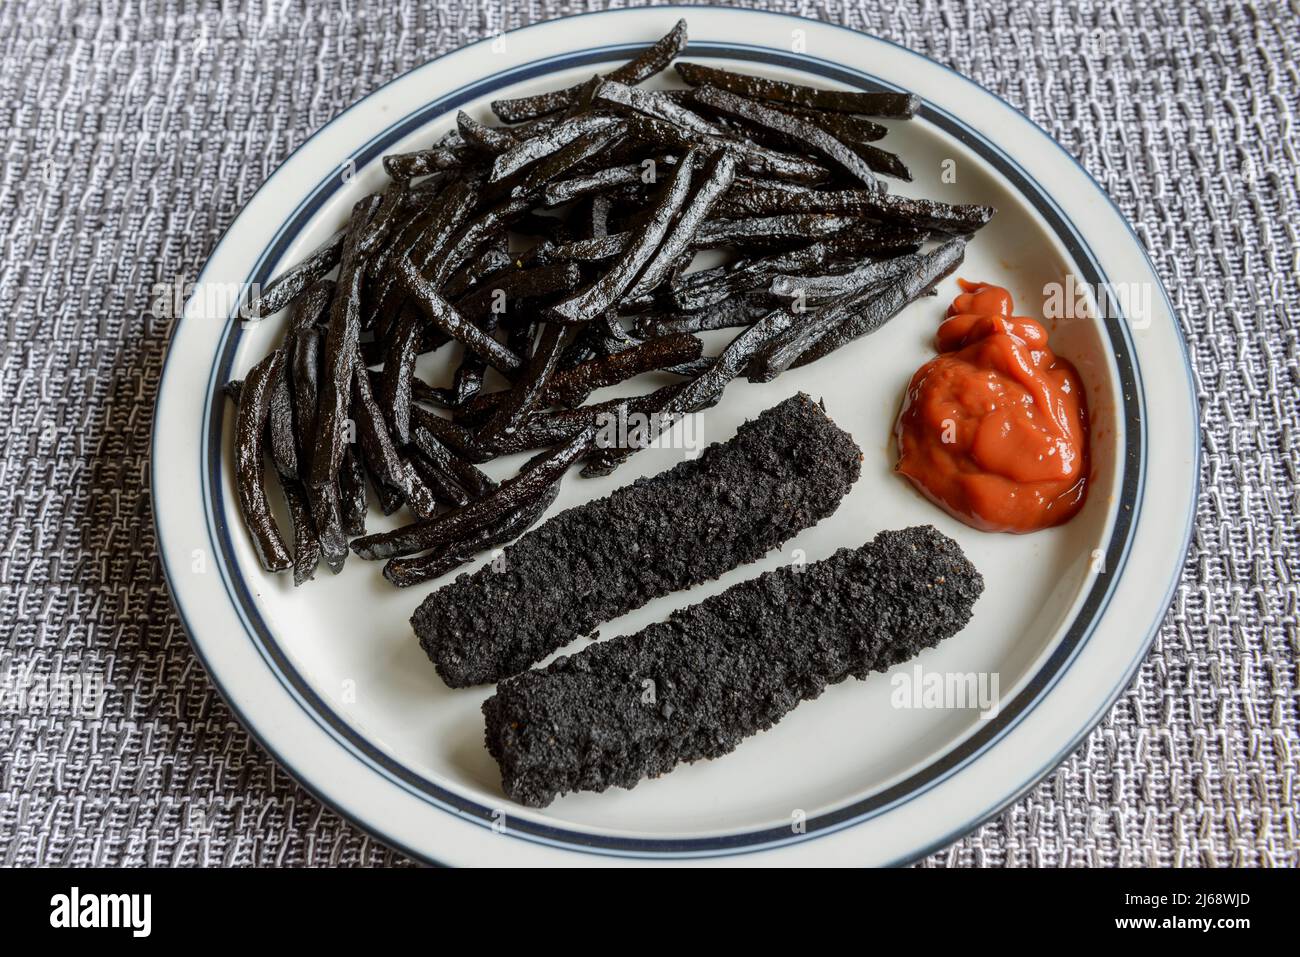 A plate of badly burnt, black, fish fingers and chips, French fries. Stock Photo